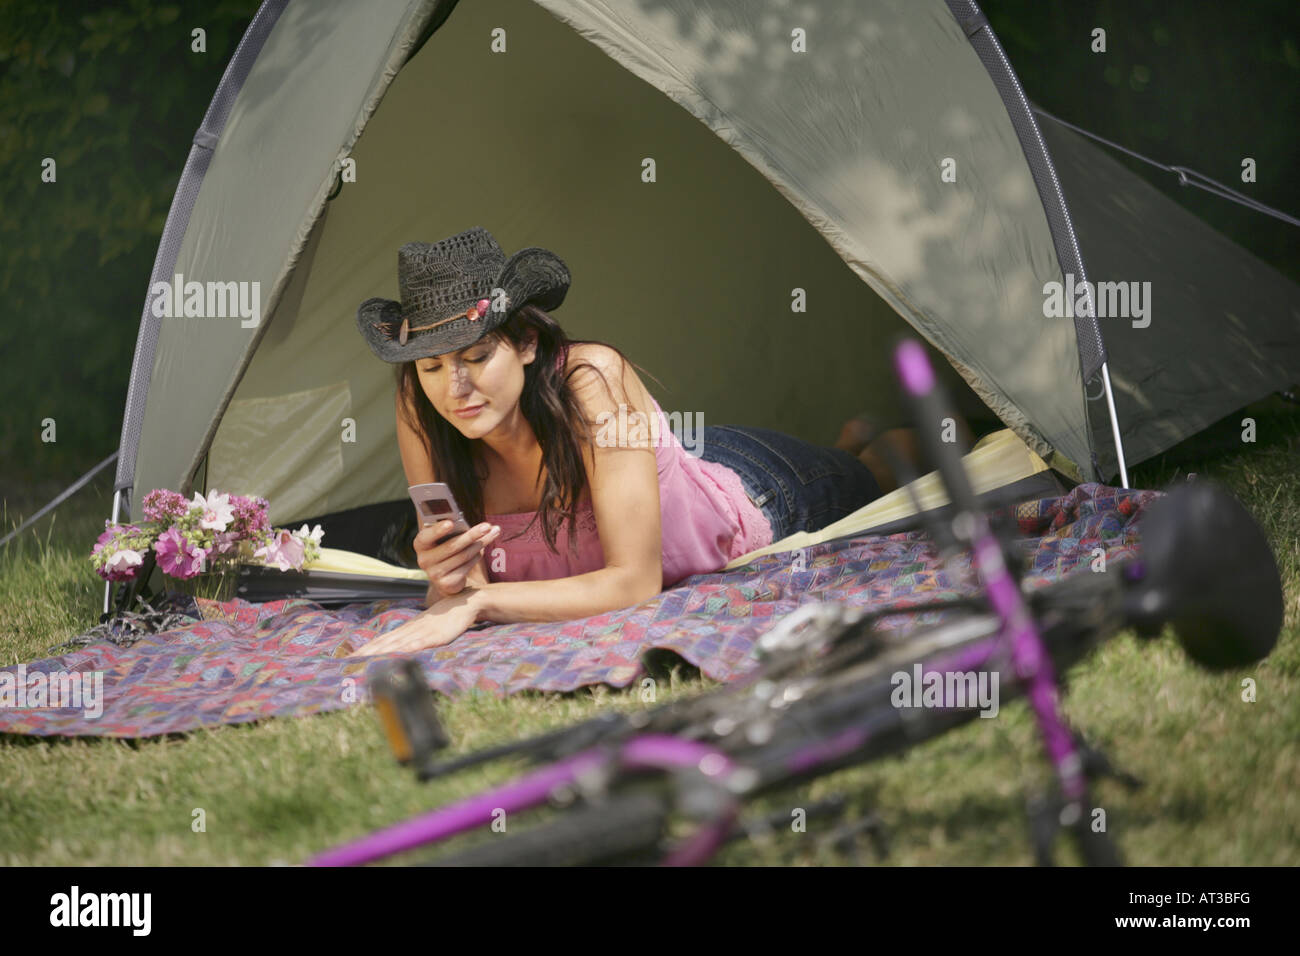 A dark haired girl in a tent texting on a mobile phone Stock Photo